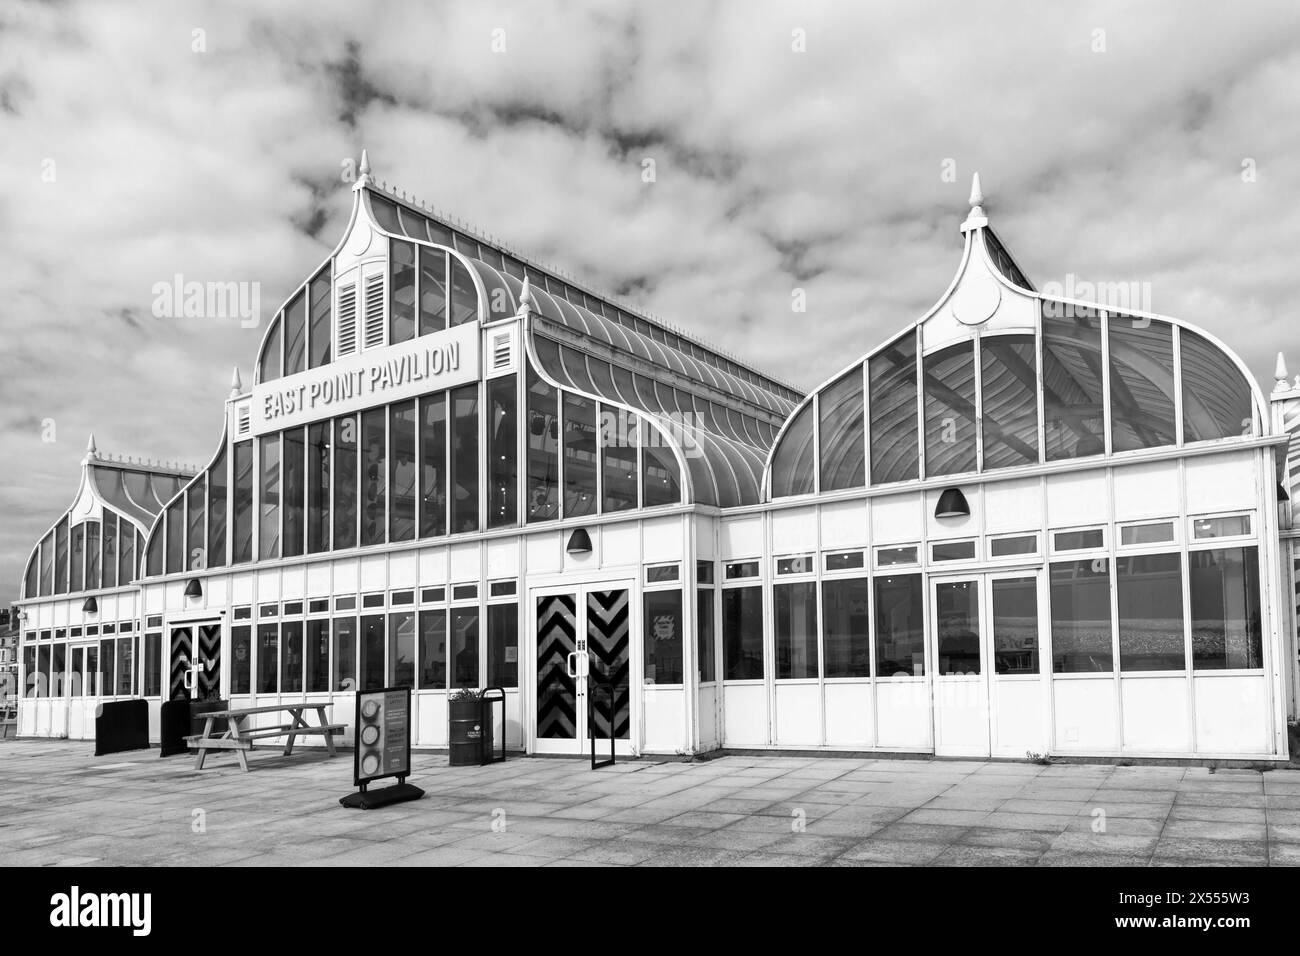 East Point Pavilion at Lowestoft, Suffolk, UK in April Stock Photo